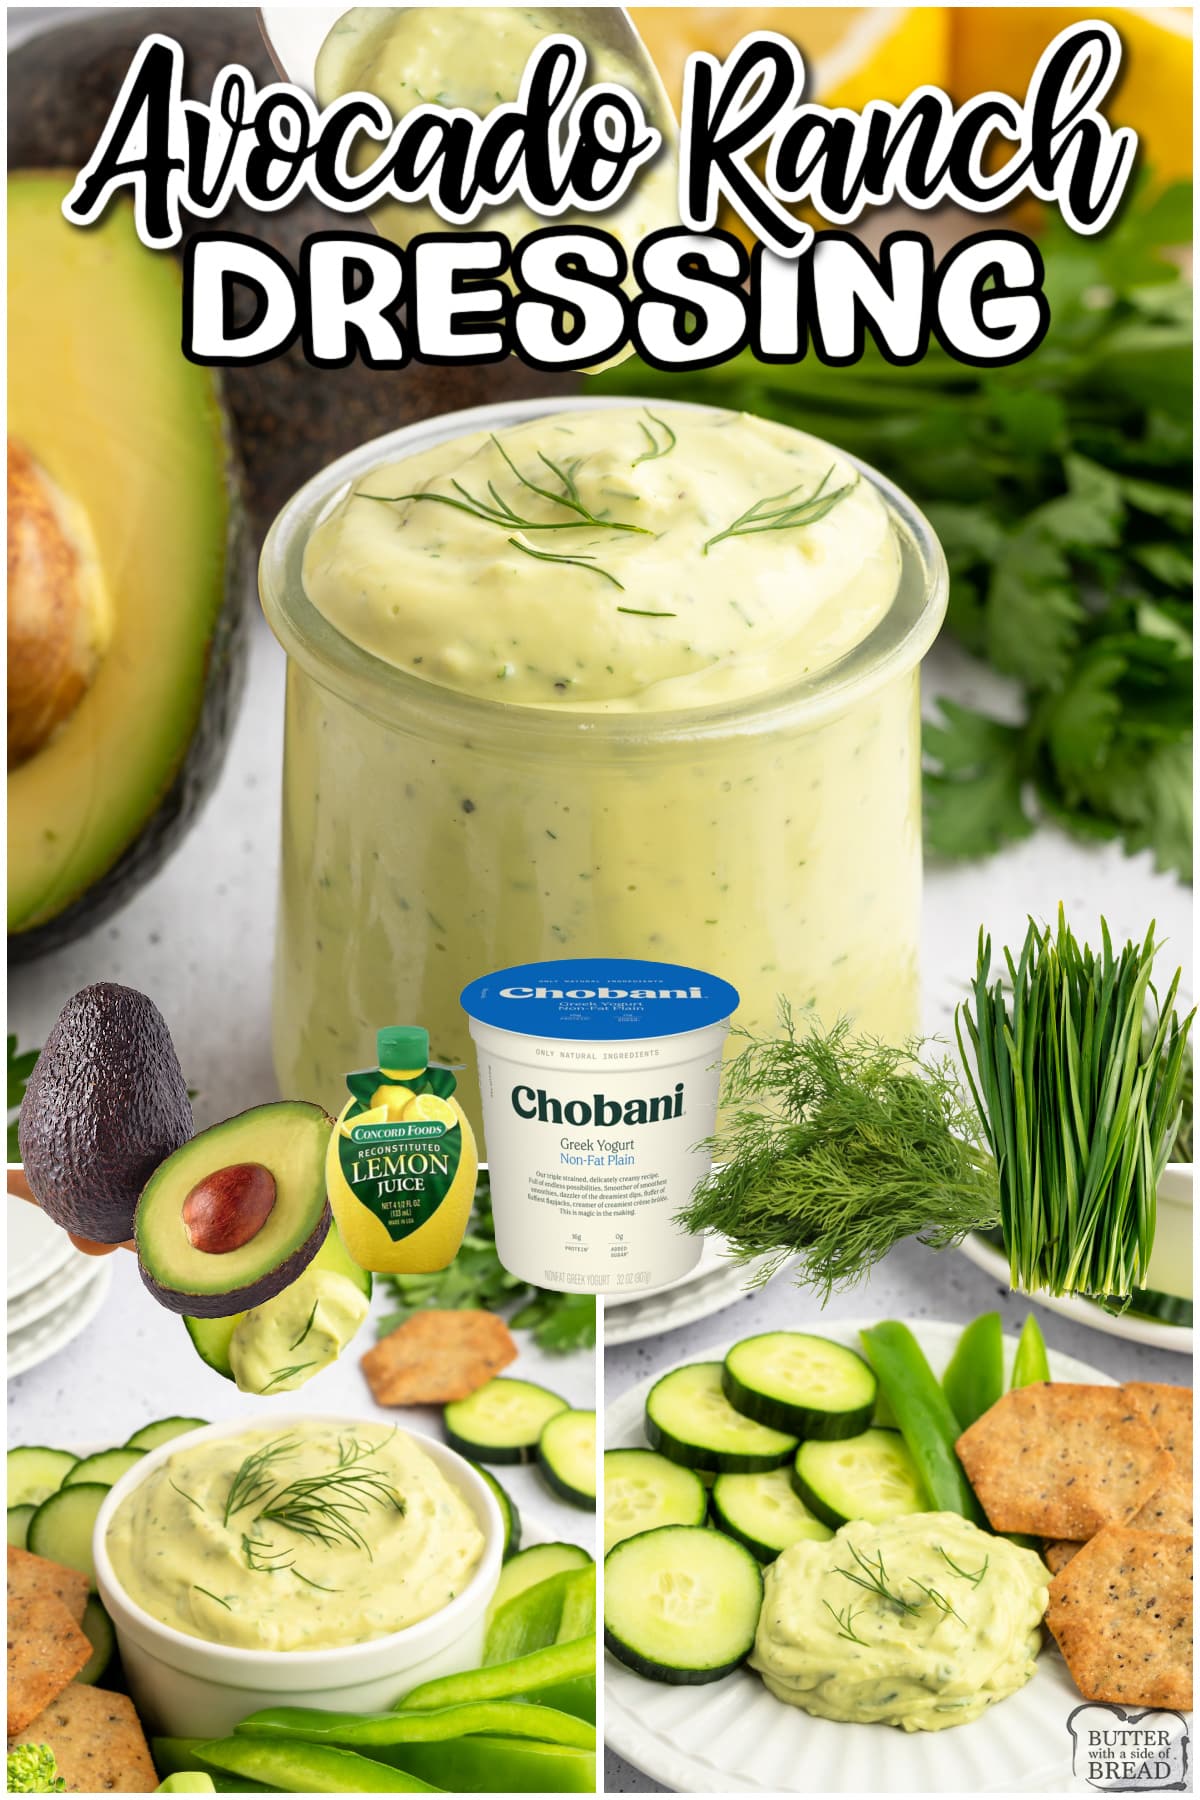 Homemade Avocado Ranch Dressing is made with real avocado, Greek yogurt and tons of fresh herbs. This healthier avocado ranch dressing is delicious, and has only 70 calories per serving! 